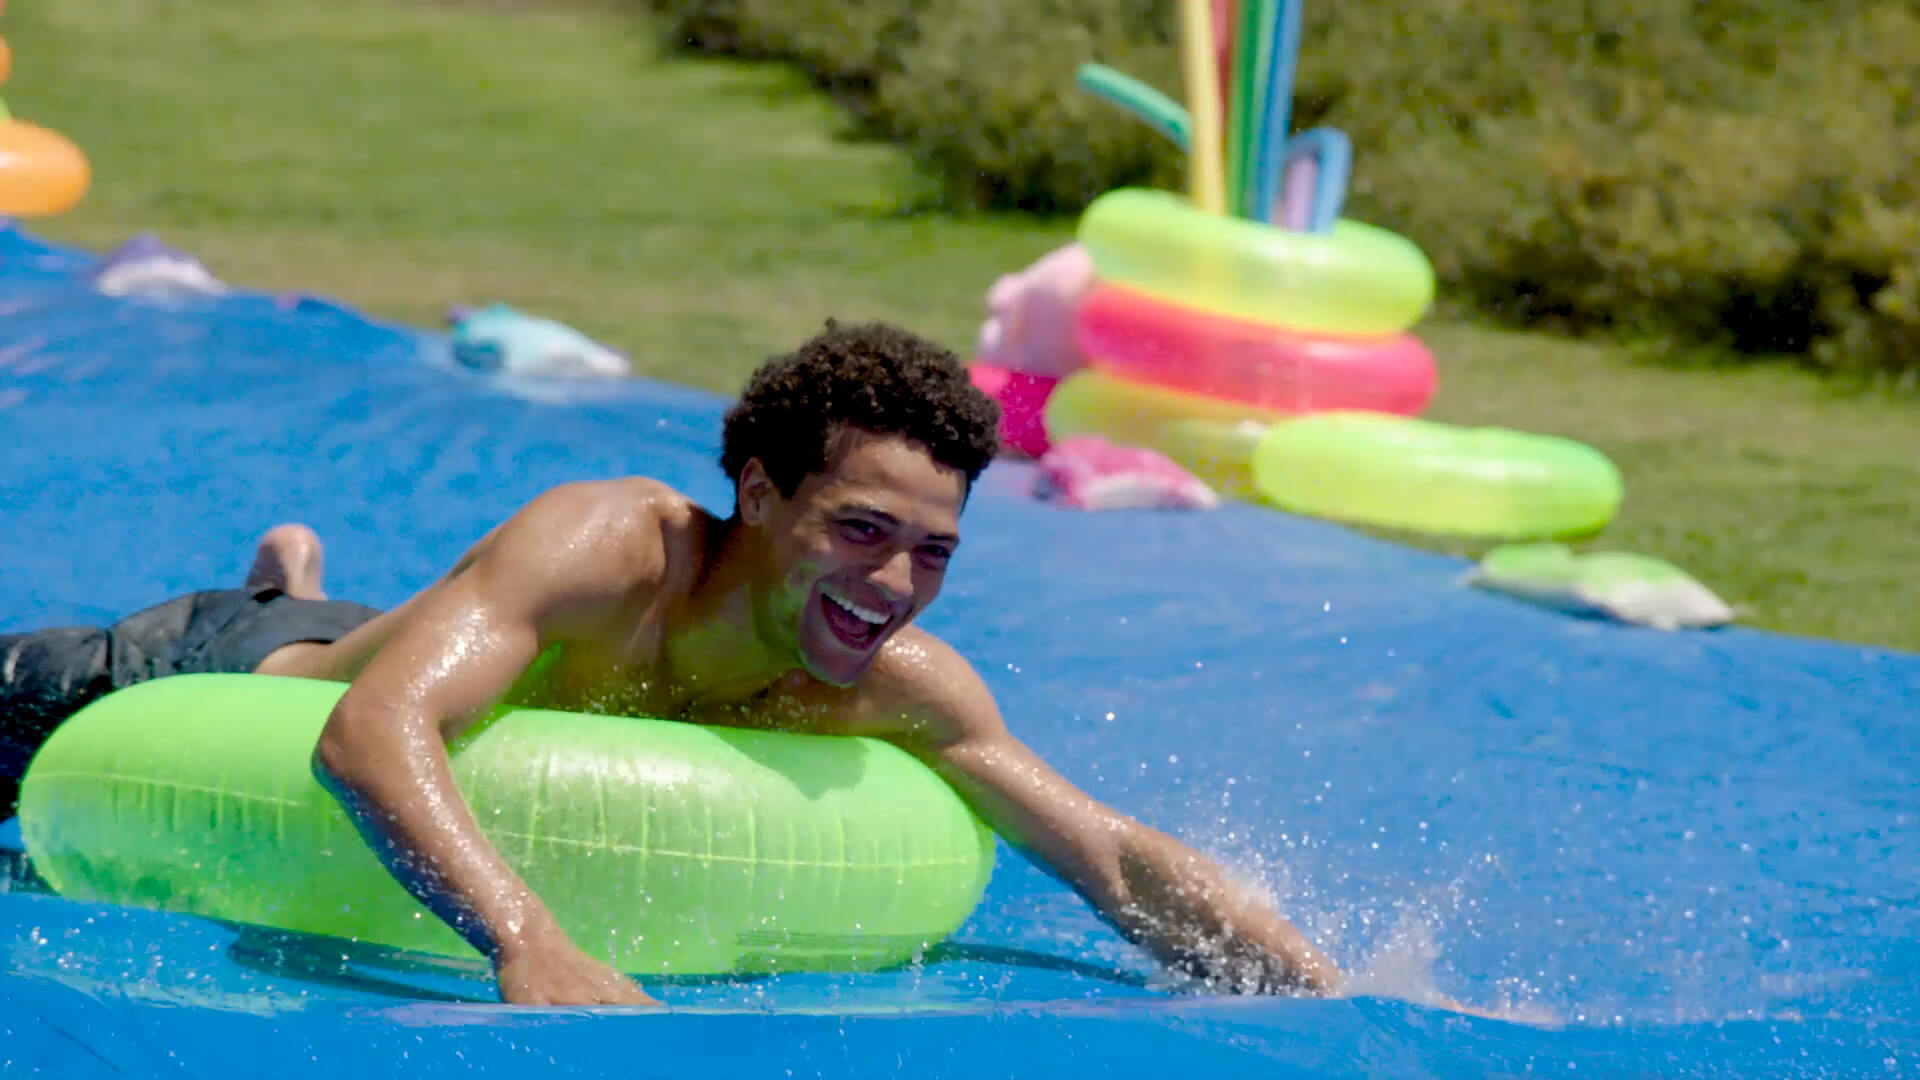 a male rides an inner tube down a water slide for Hollister Co.